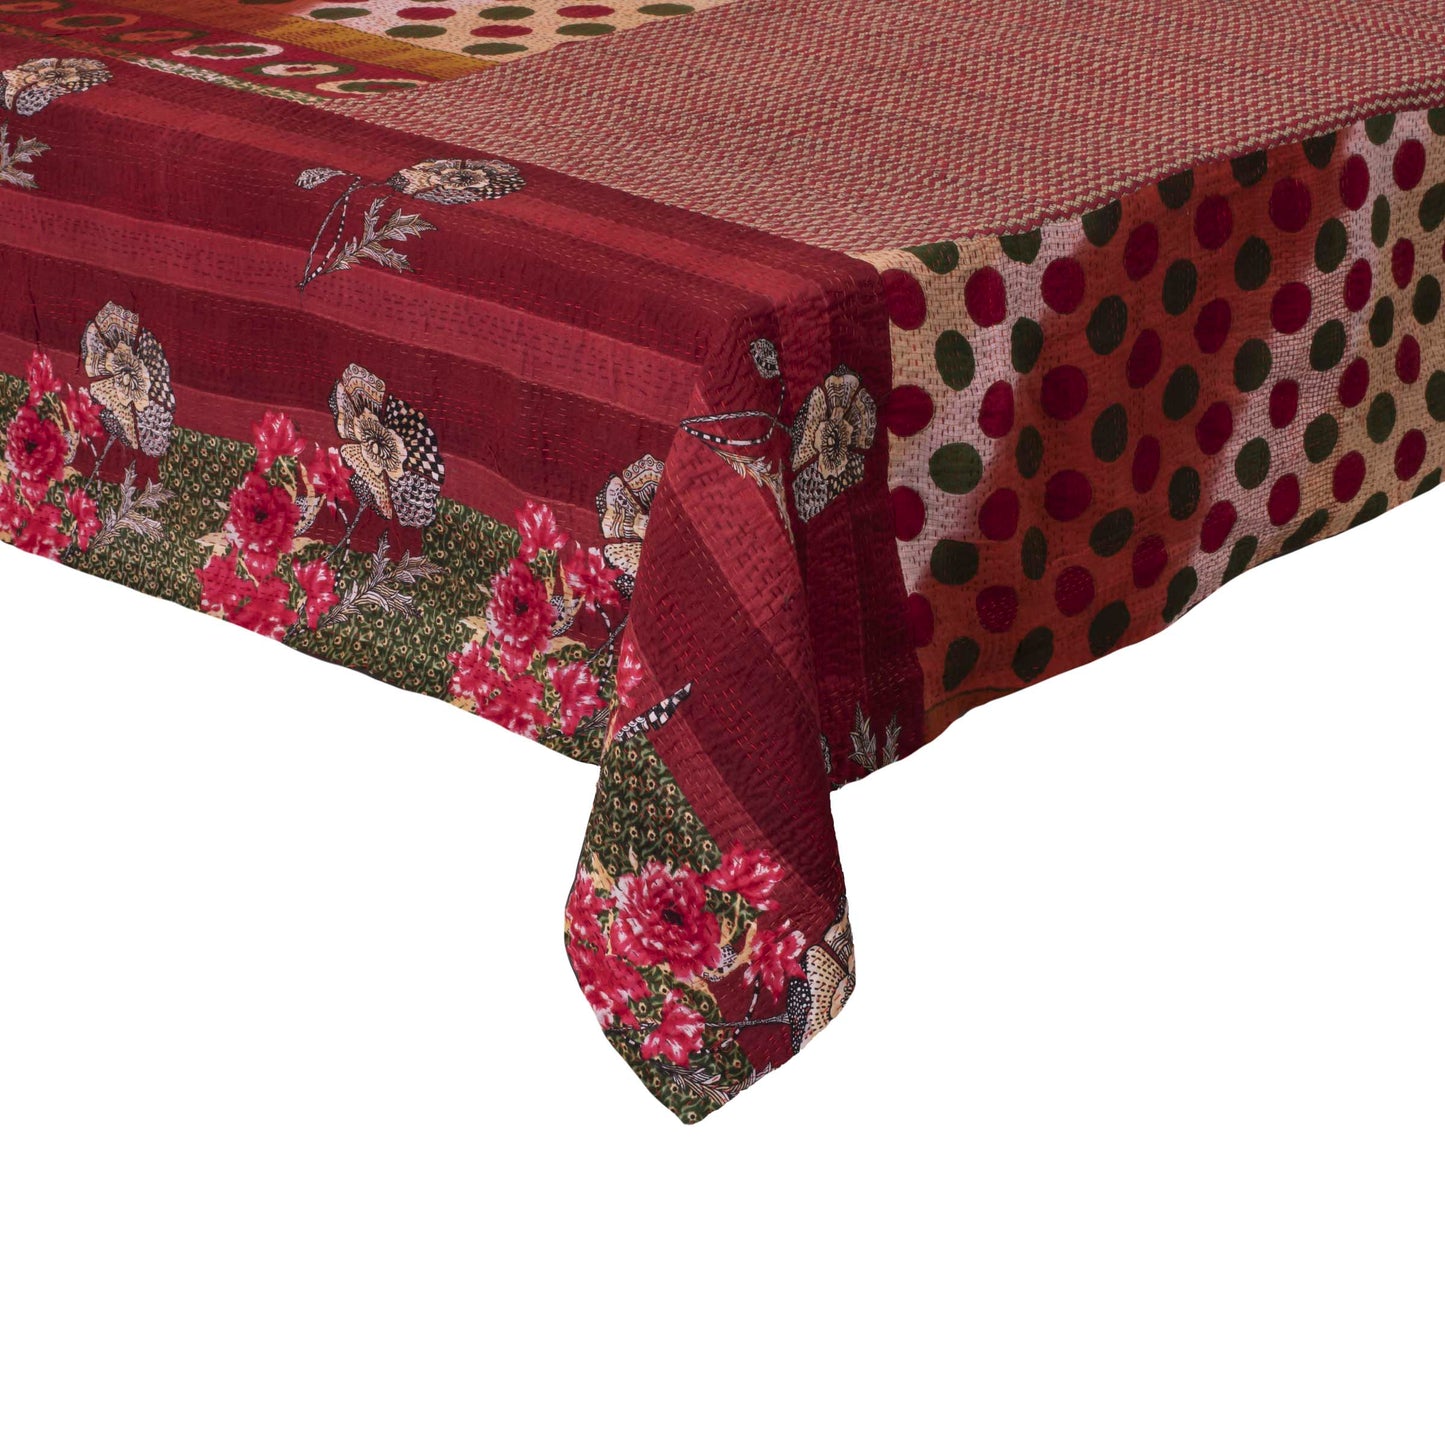 VINTAGE COTTON KANTHA TABLE COVERS - 009